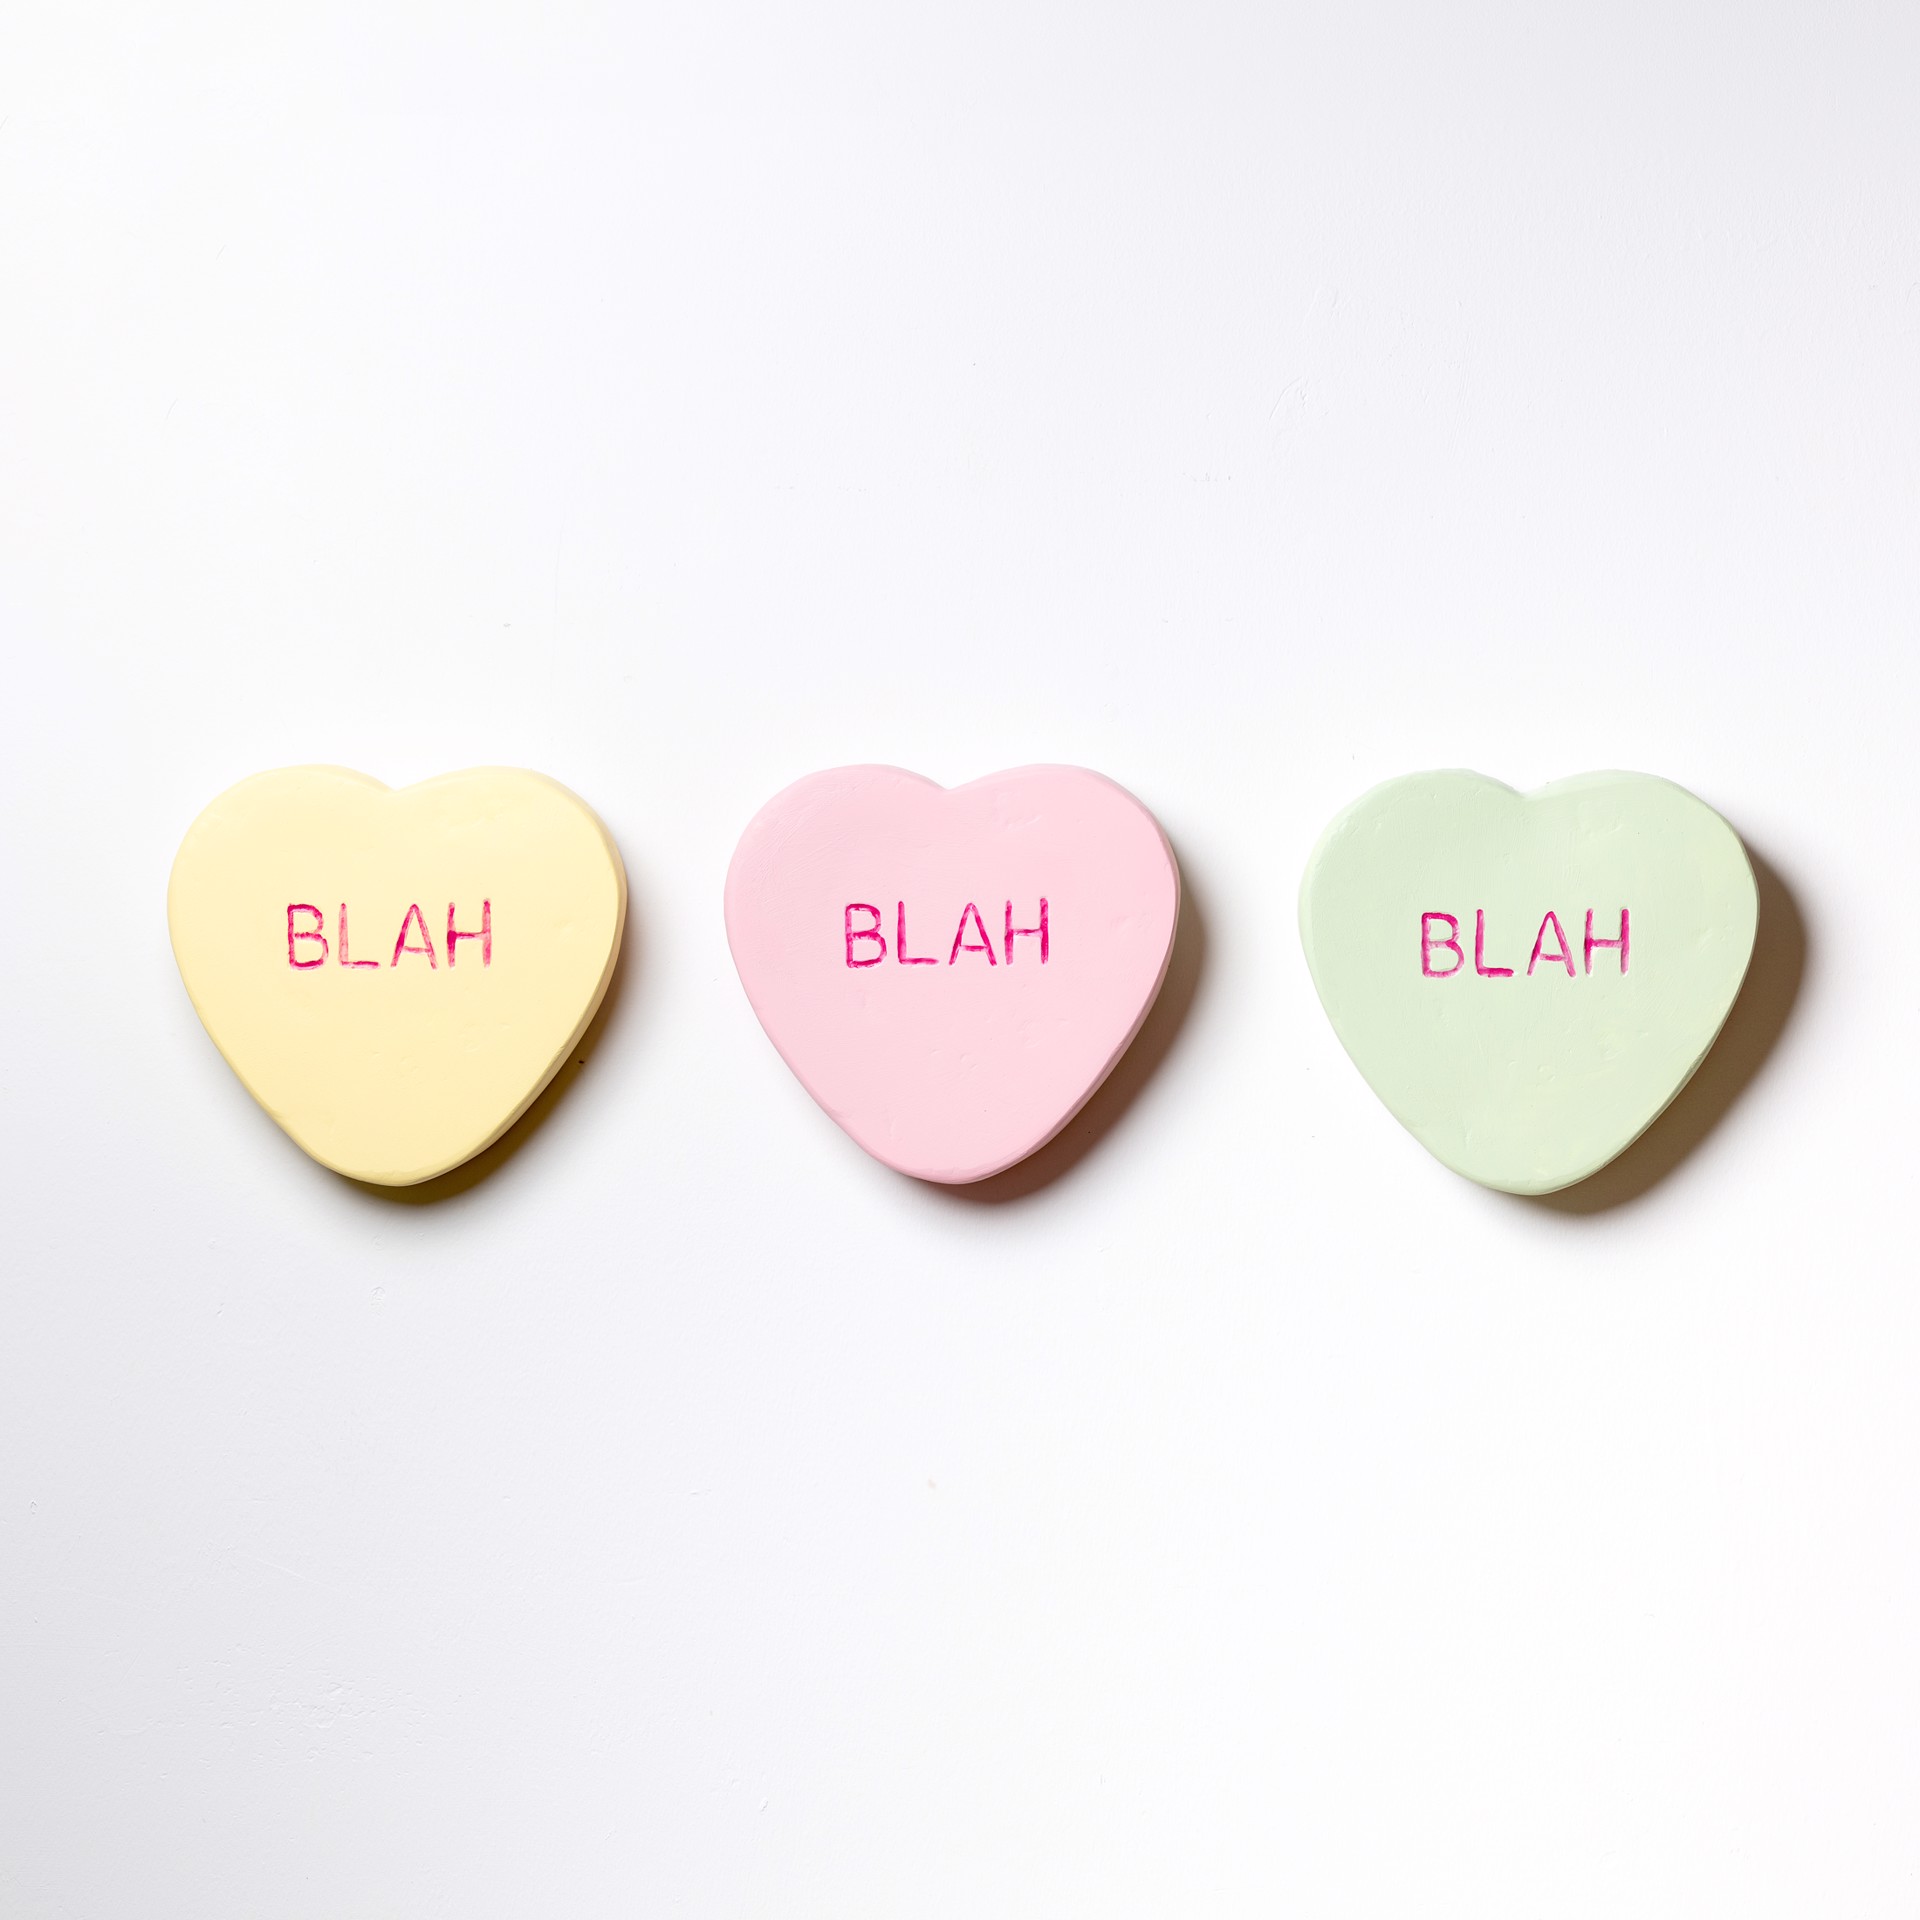 Conversation Hearts by Anna Sweet